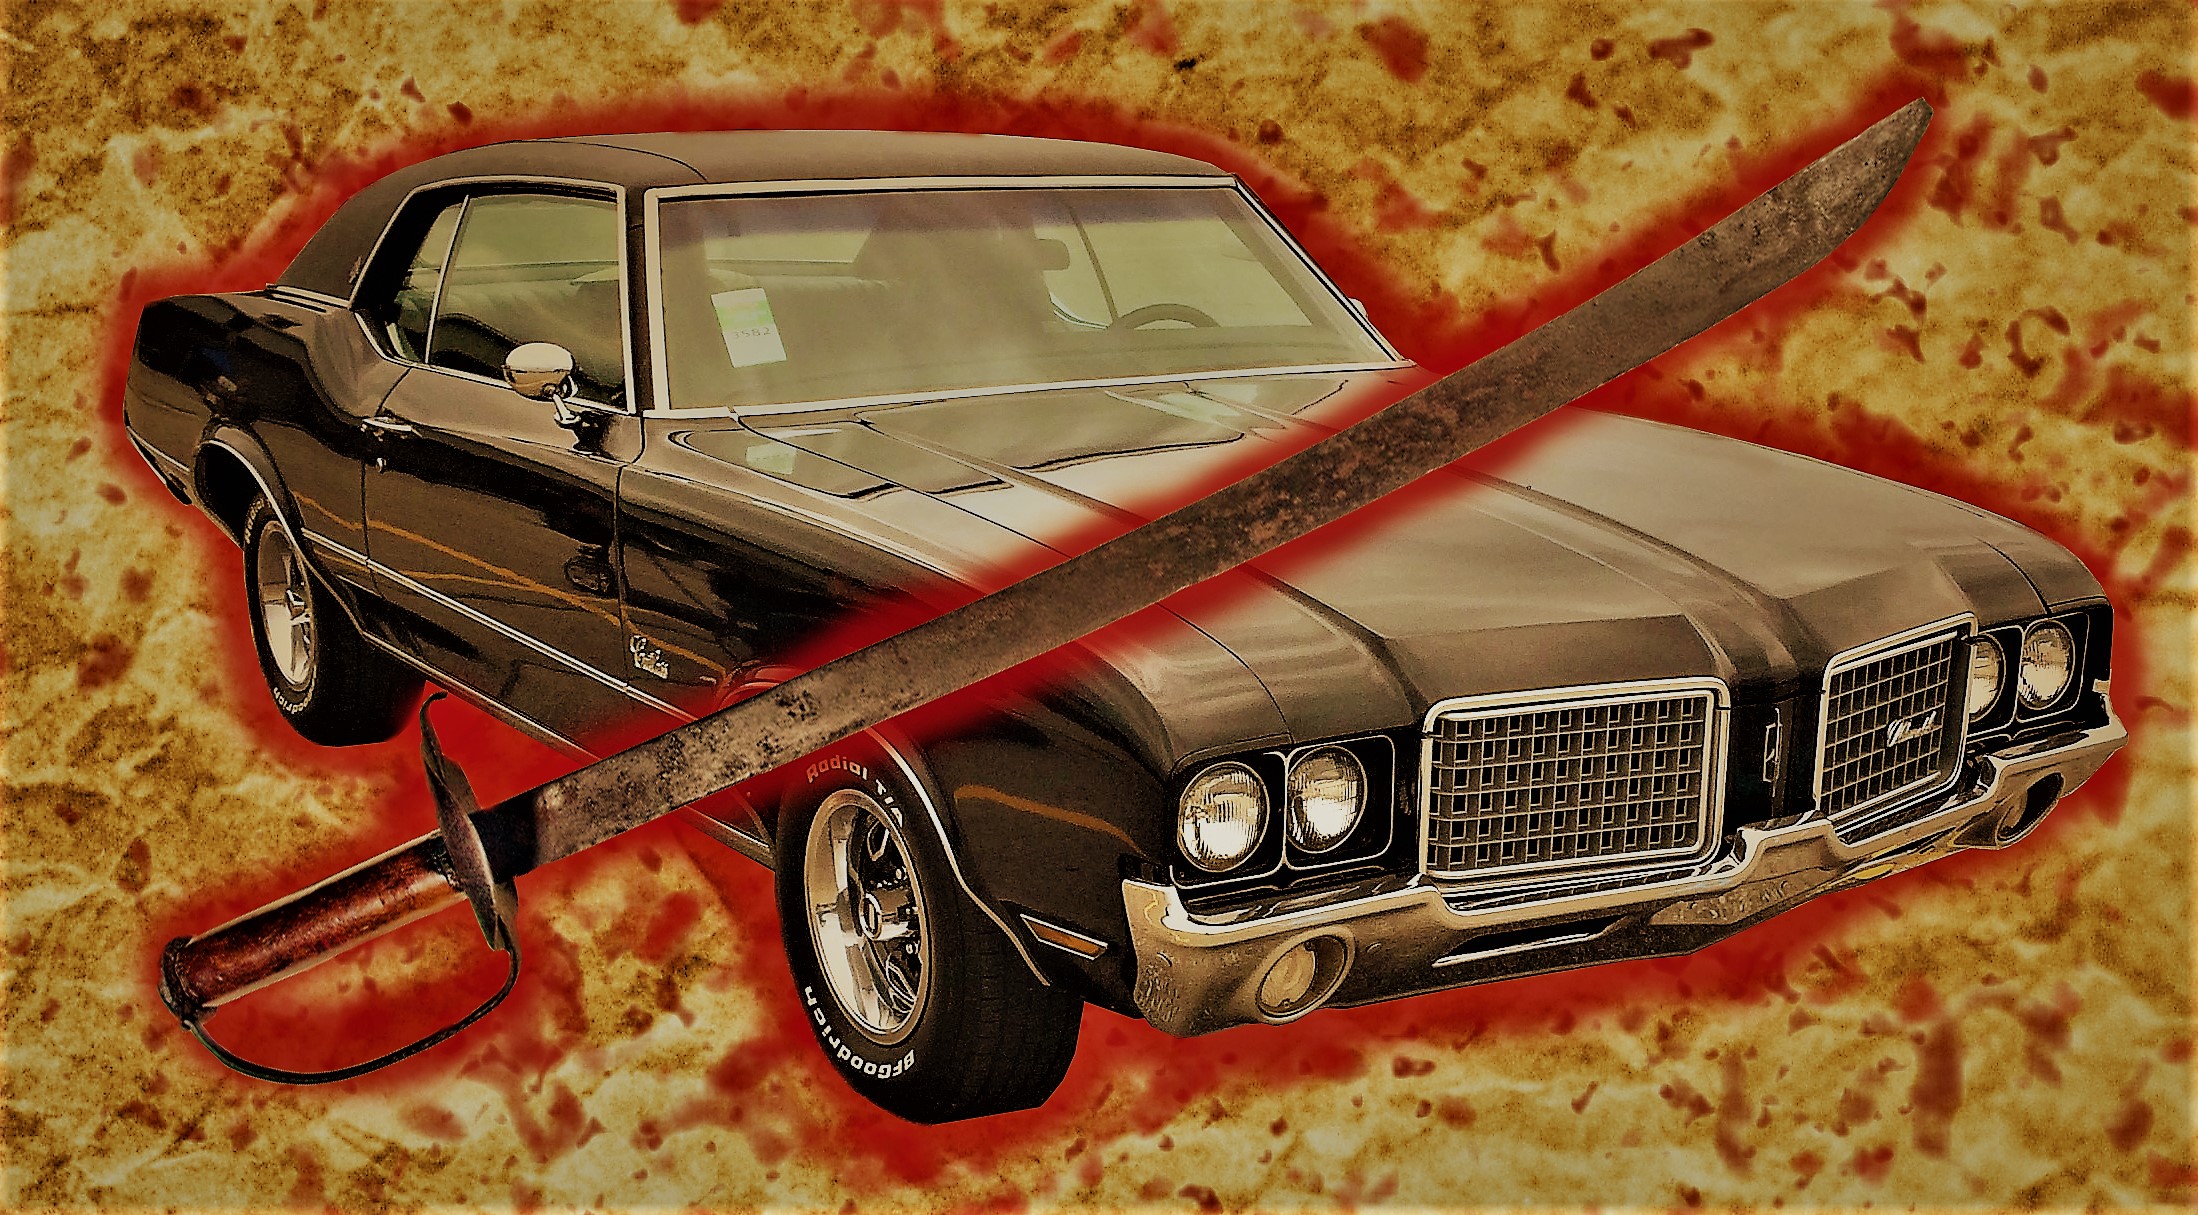 Check Out This Short History on the Oldsmobile Cutlass